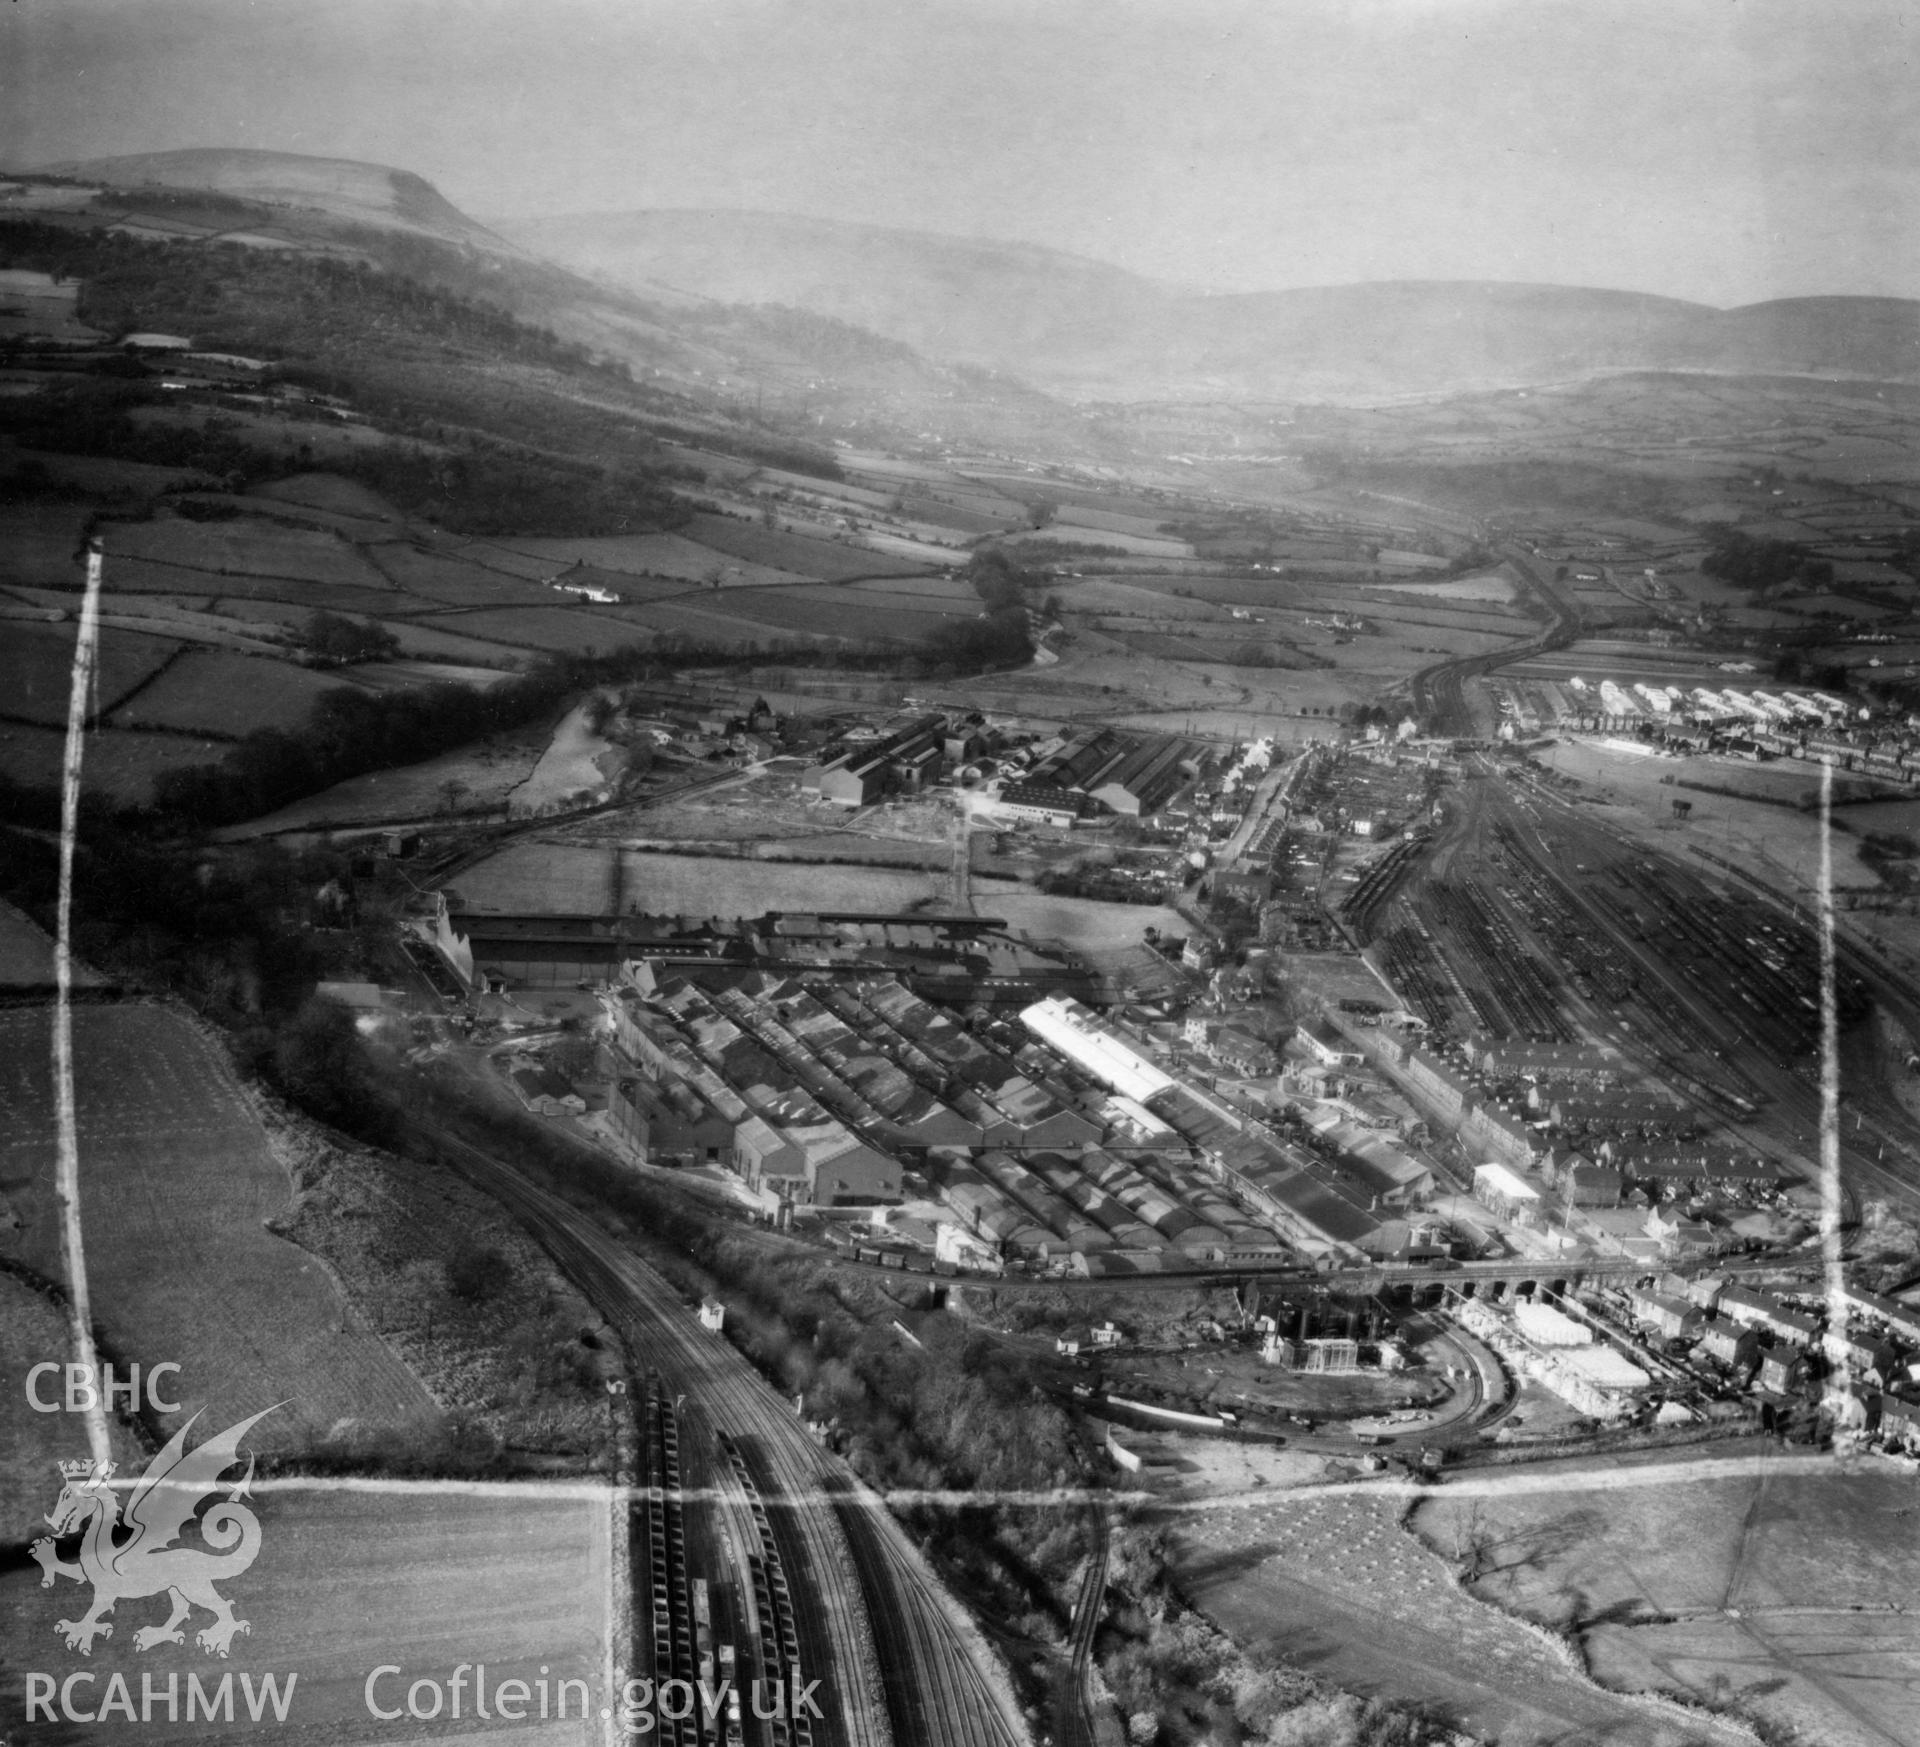 View of the Northern Aluminium Company works at Rogerstone. Oblique aerial photograph, 5?" cut roll film.